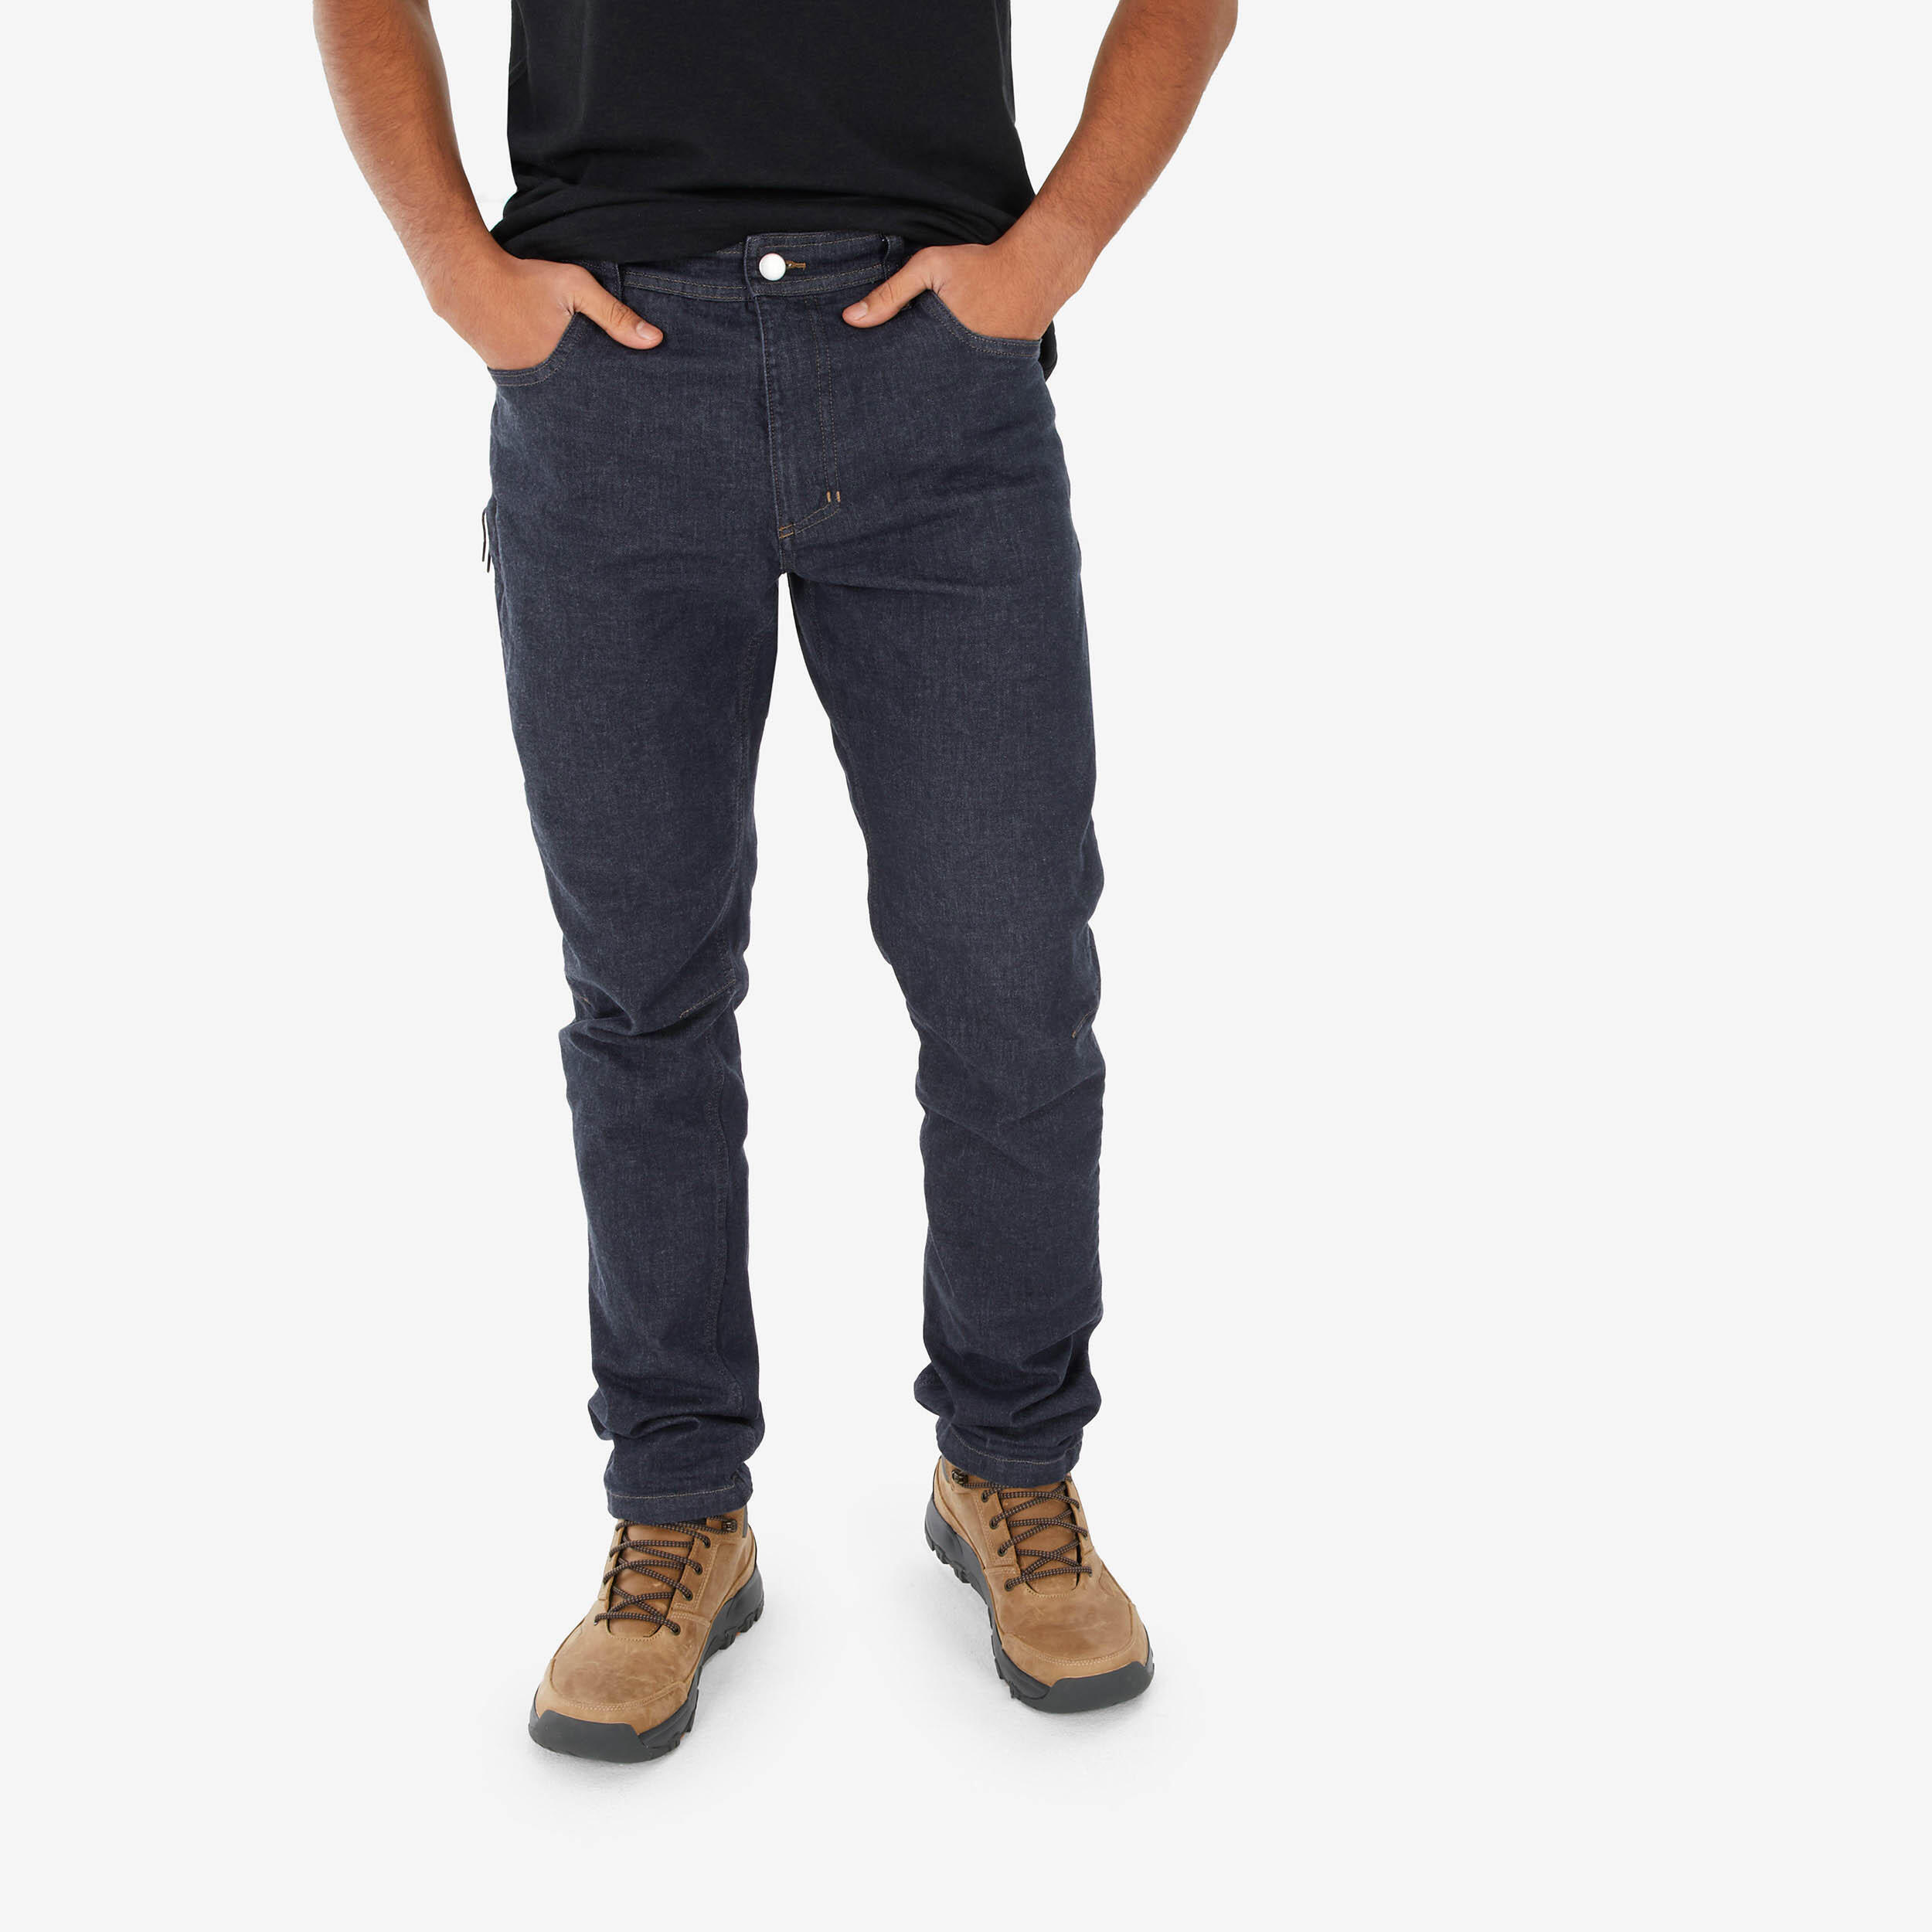 Denims & Trousers Comfort Fit Trouser Jeans for men, Size: Medium, Fabric  at Rs 800/piece in Dehradun